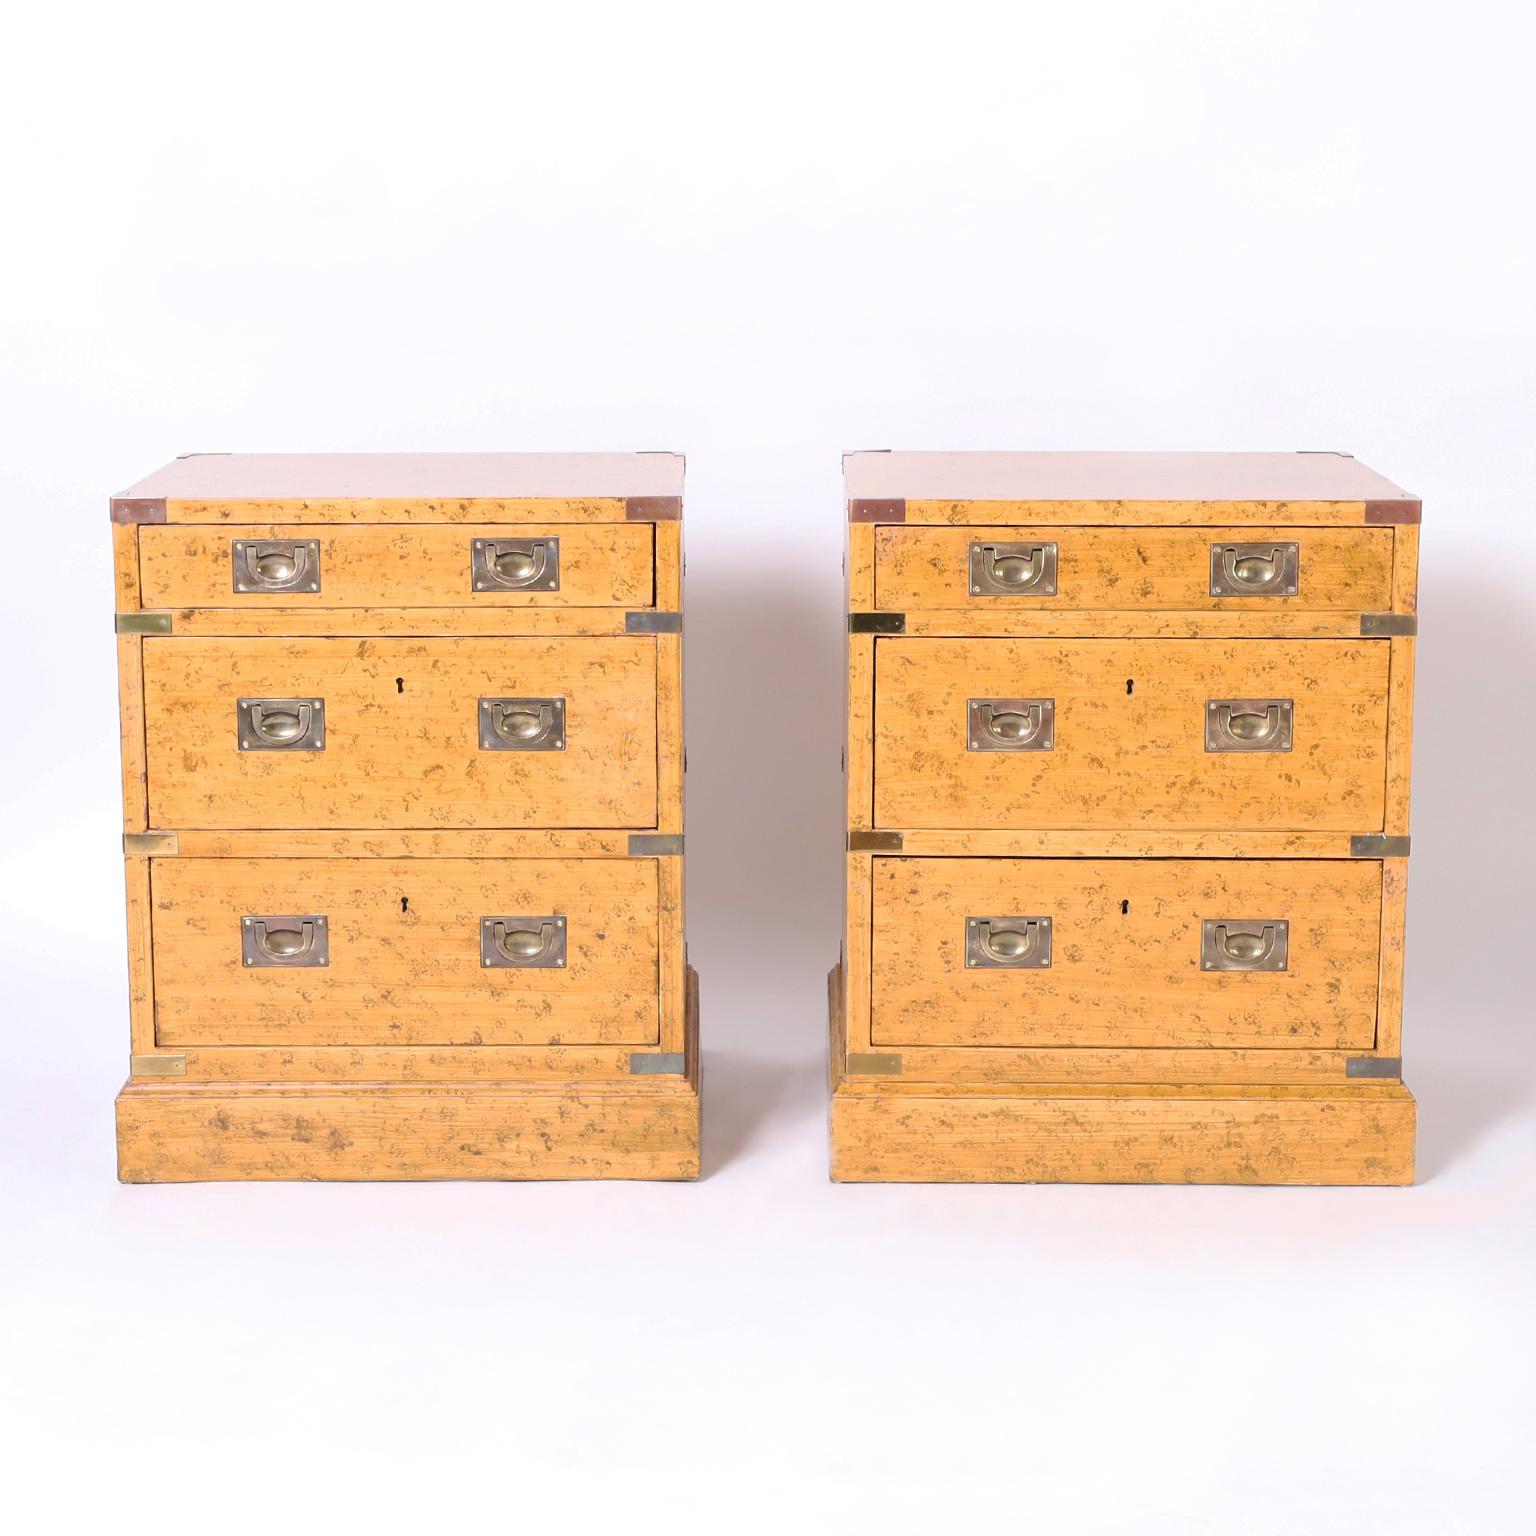 Standout pair of mid century three drawer stands or chests having a faux ostrich finish, brass campaign style hardware and block feet. Signed Trouvailles in a drawer.